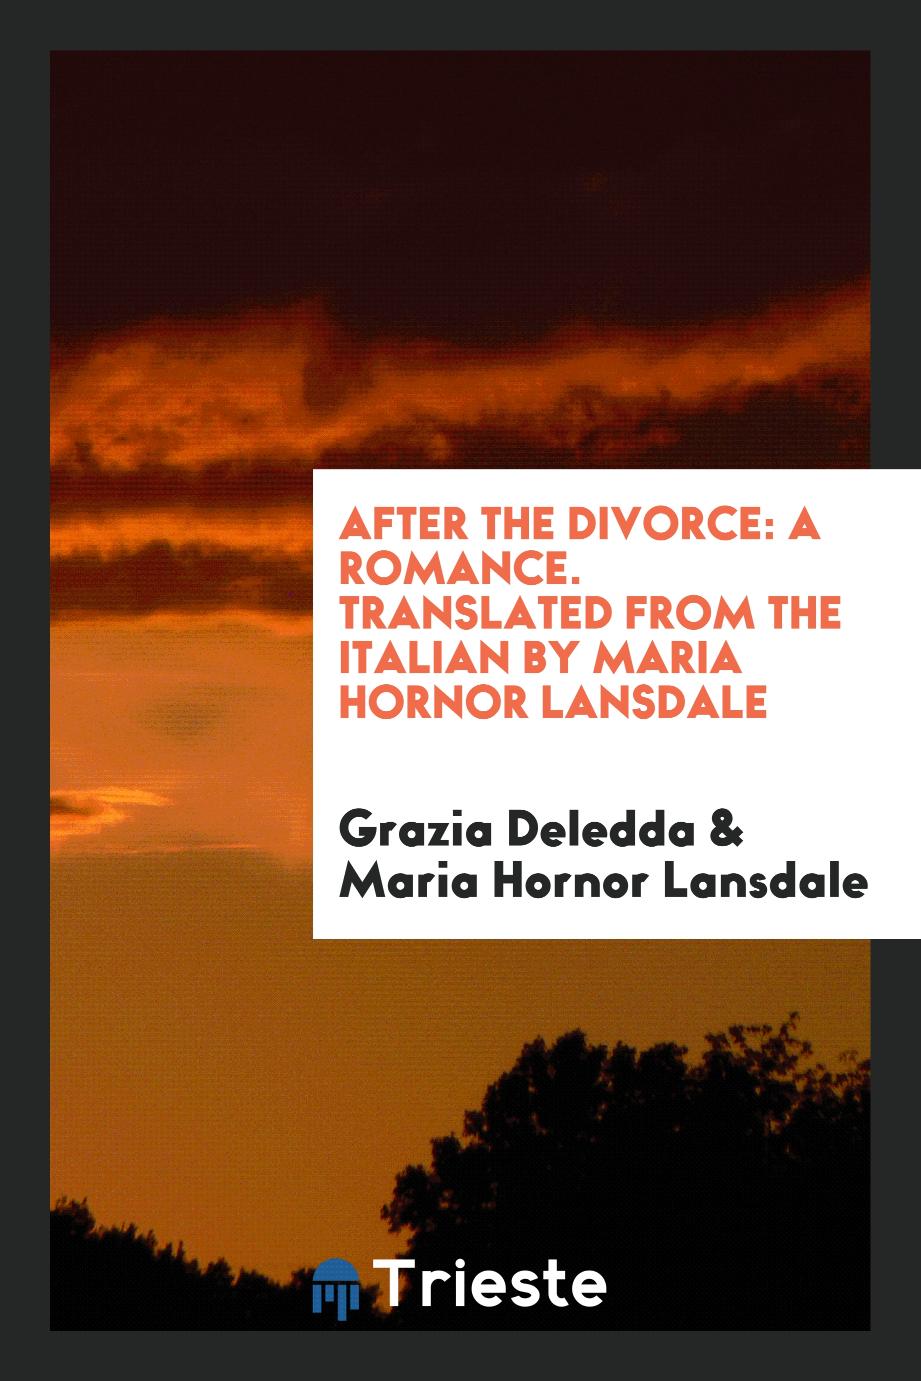 After the Divorce: A Romance. Translated from the Italian by Maria Hornor Lansdale